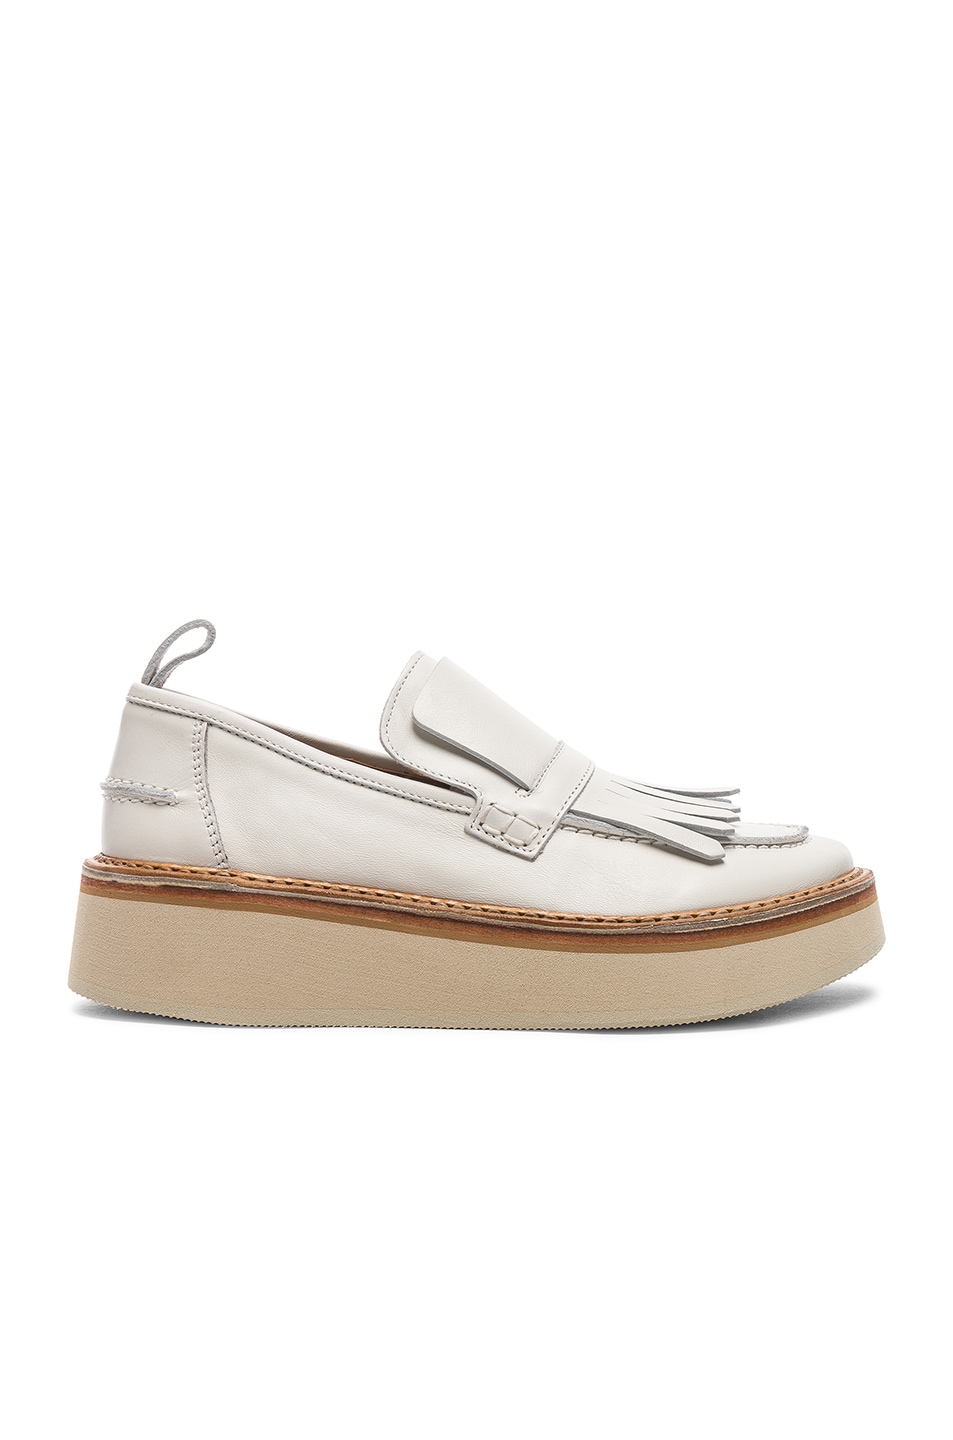 Image 1 of Flamingos Leather Trianon Loafers in Ecru & White